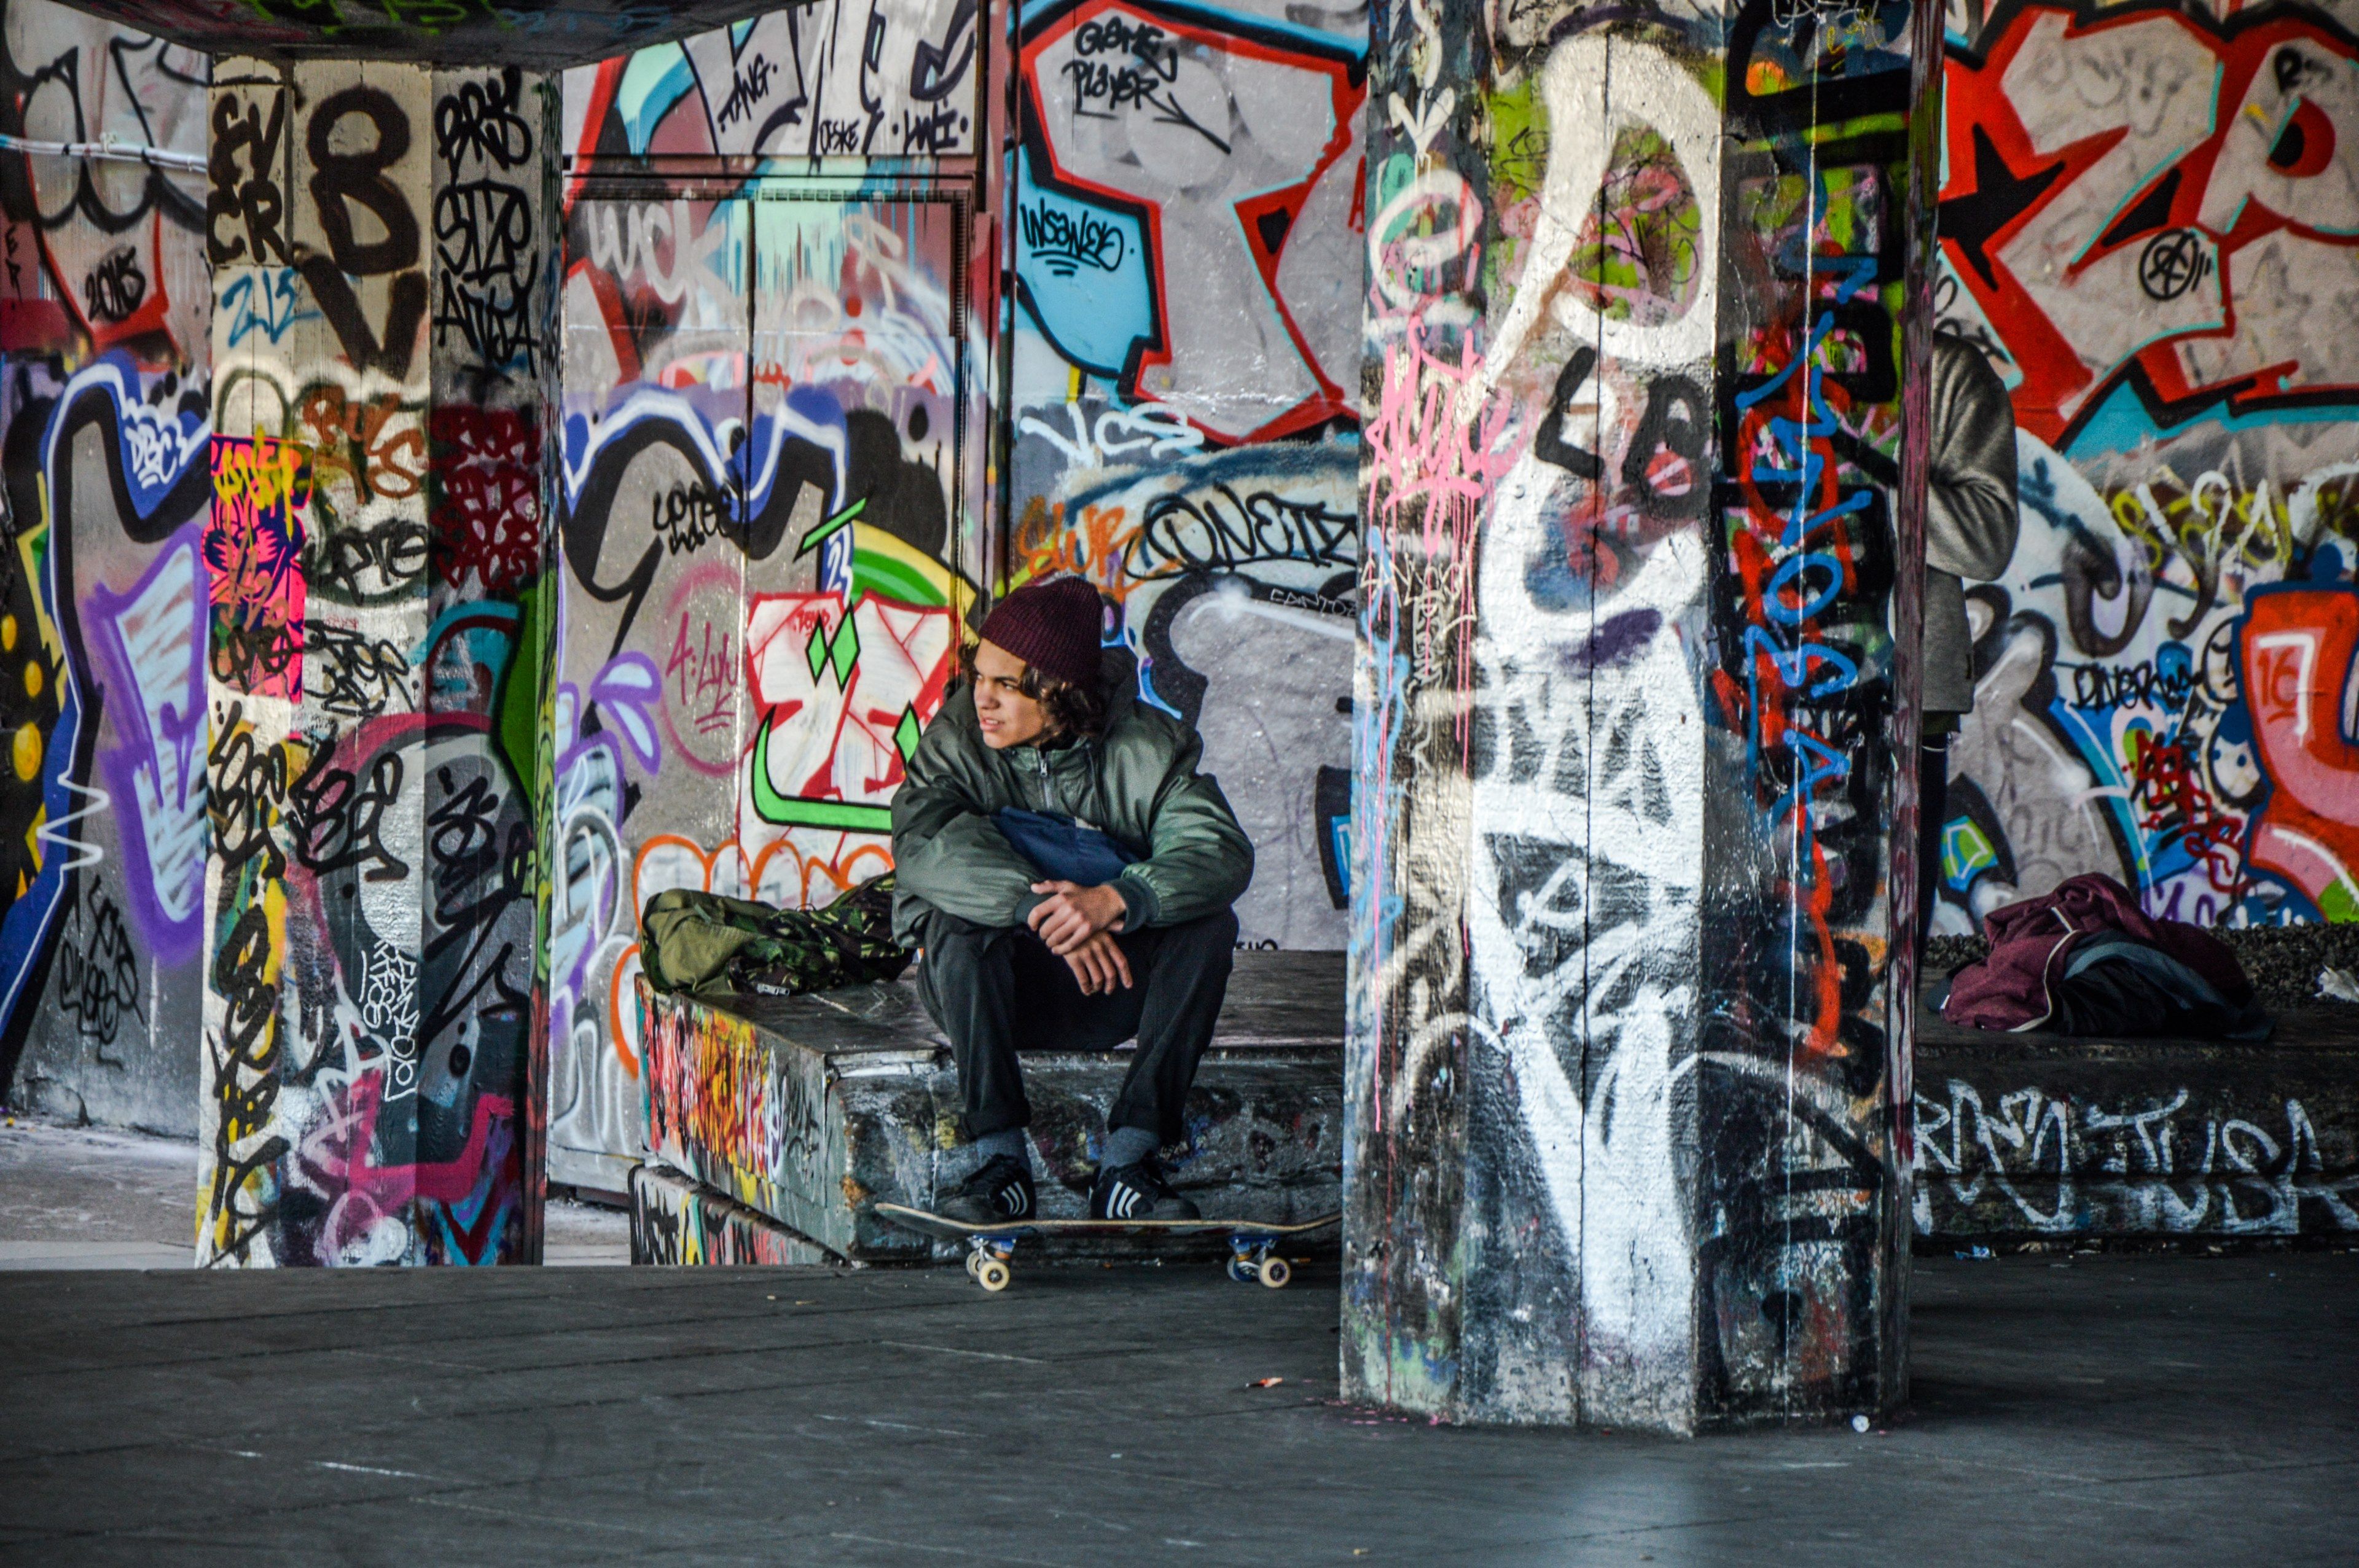 Wallpaper / young man with skateboard sitting in urban area with walls covered in colorful graffiti london, a skater sits around graffiti 4k wallpaper free download